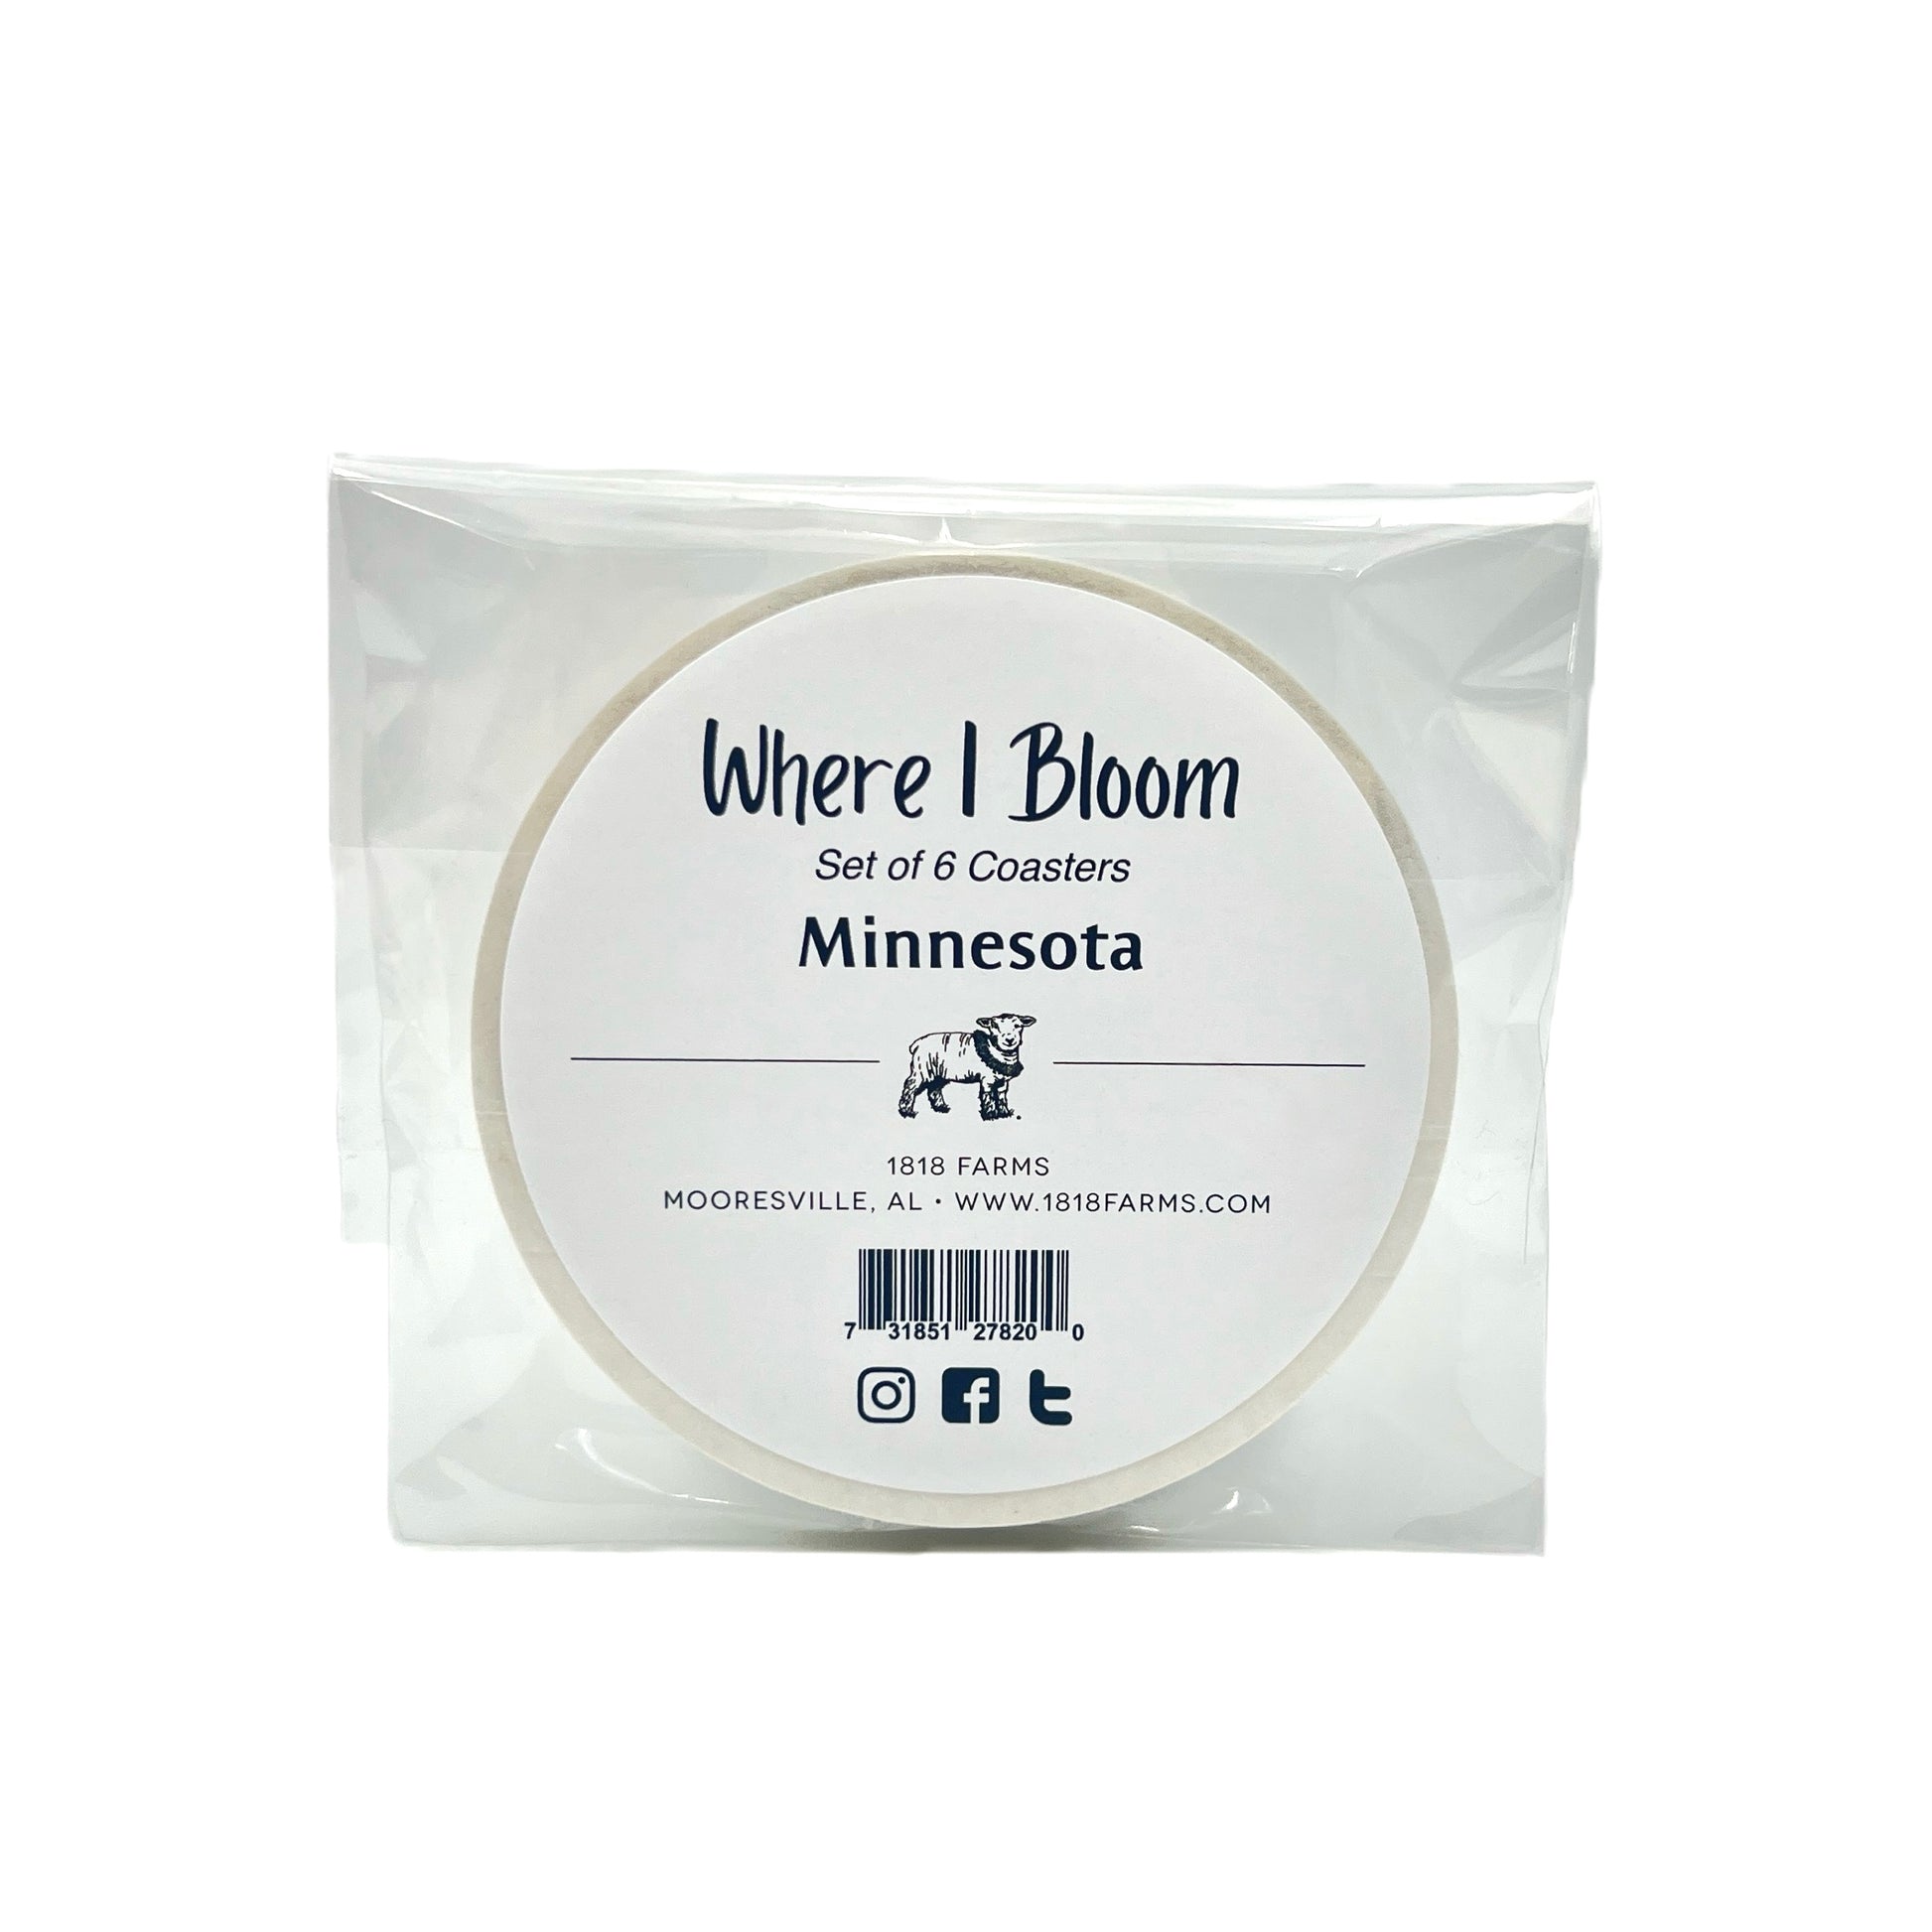 Minnesota Themed Coasters (Set of 6)  - "Where I Bloom" Collection Coaster 1818 Farms   